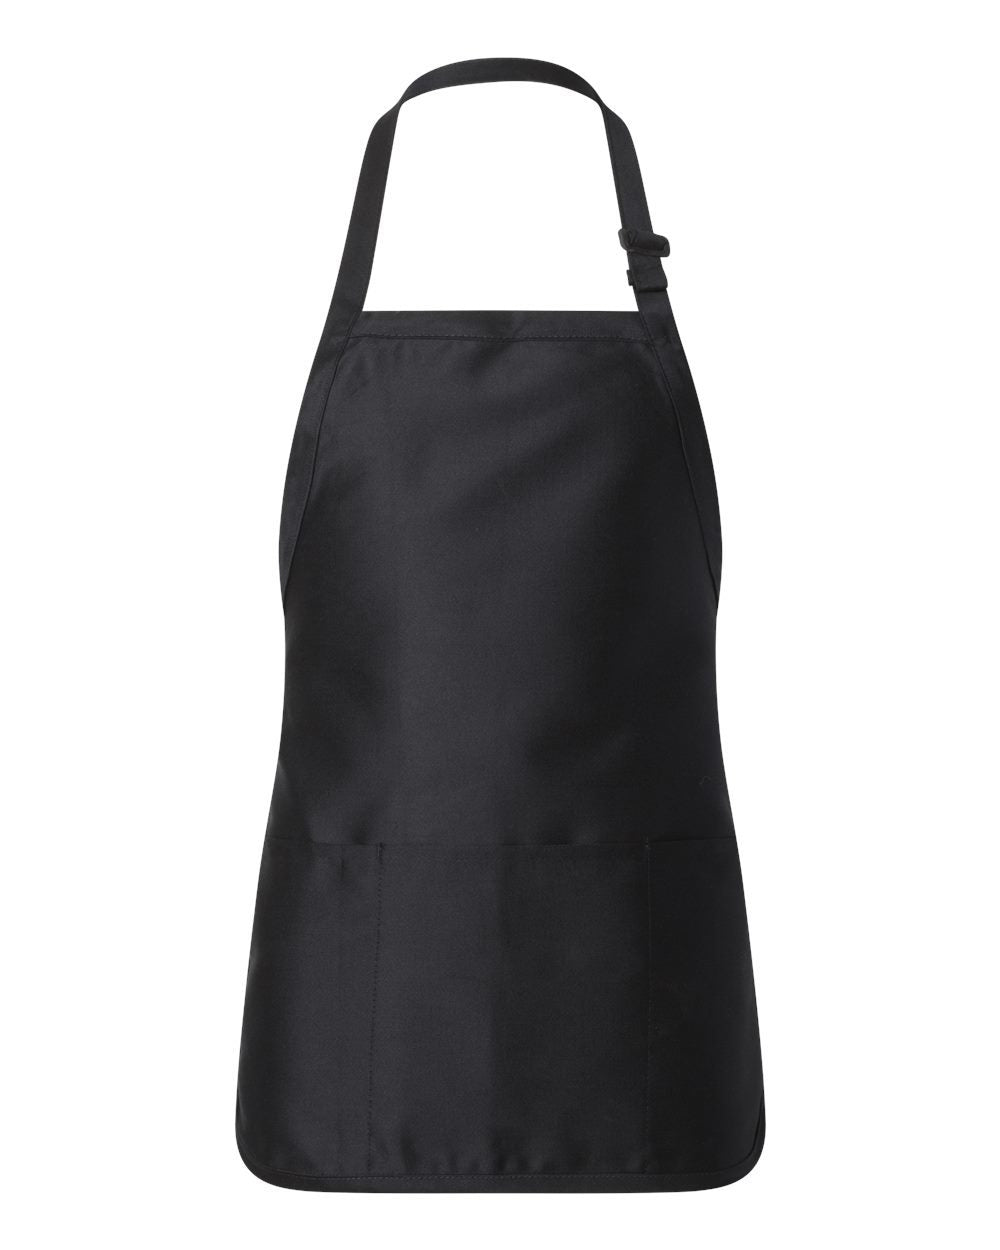 Black Apron with pouch